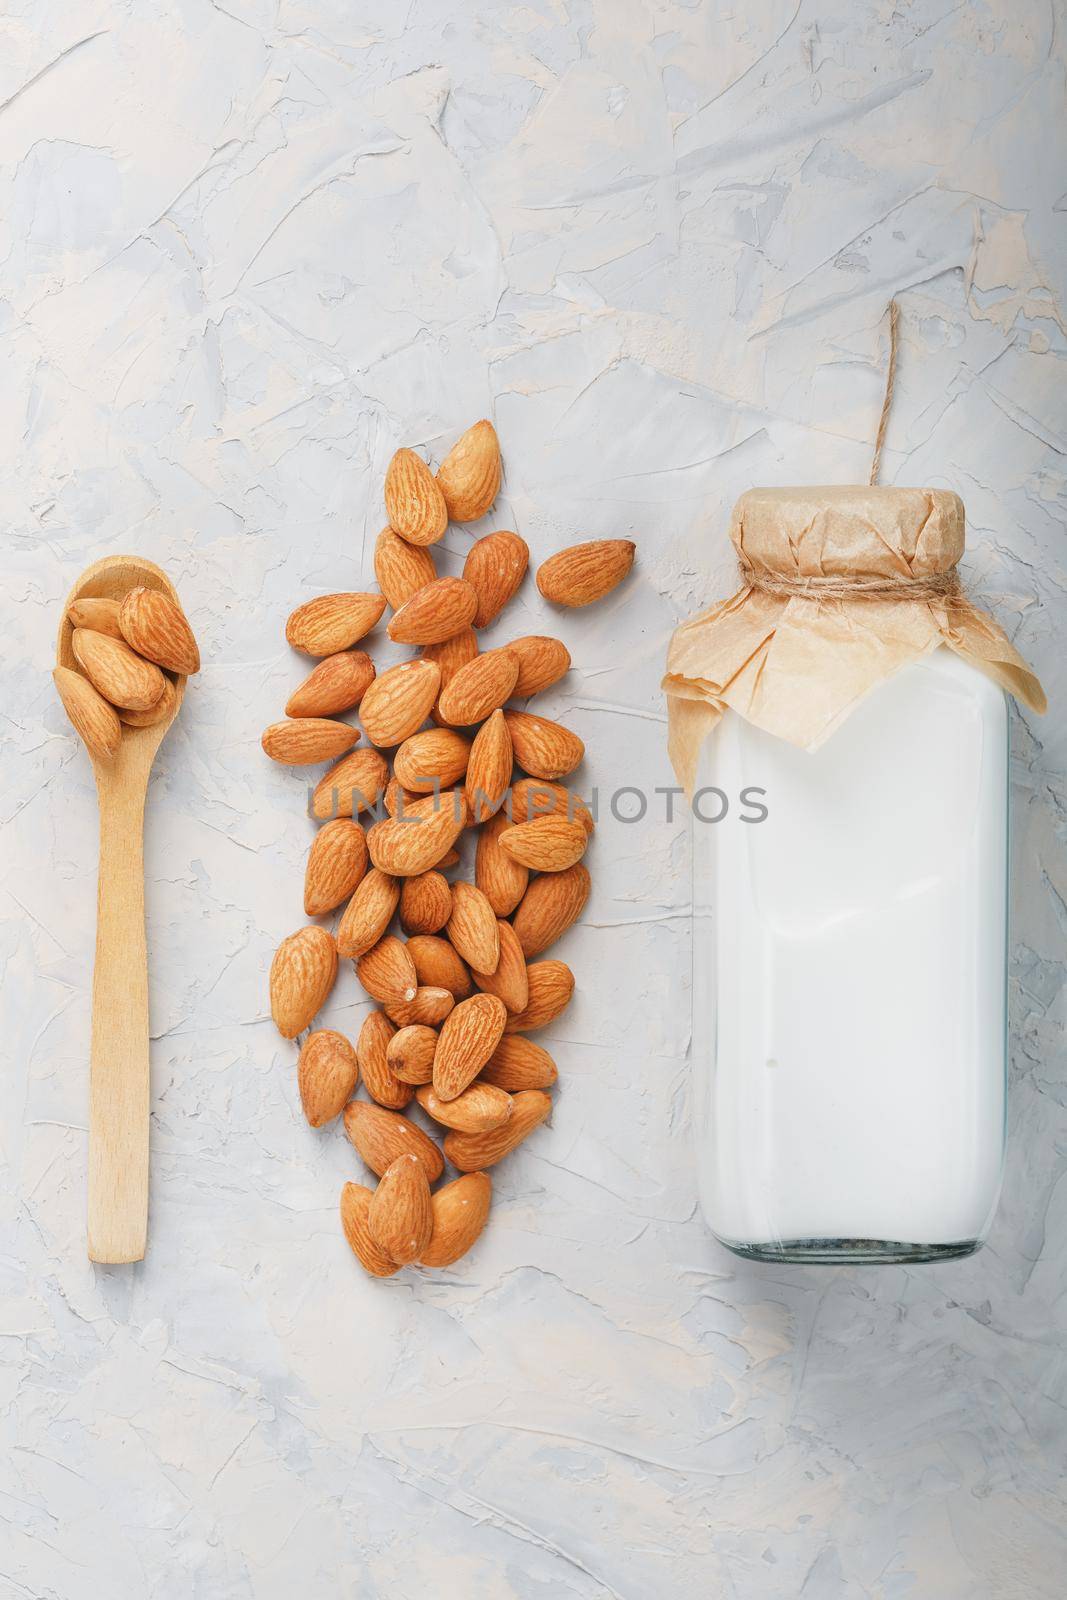 Vegan Milk from a handful of organic almond seeds in a bottle on a light background. Top view